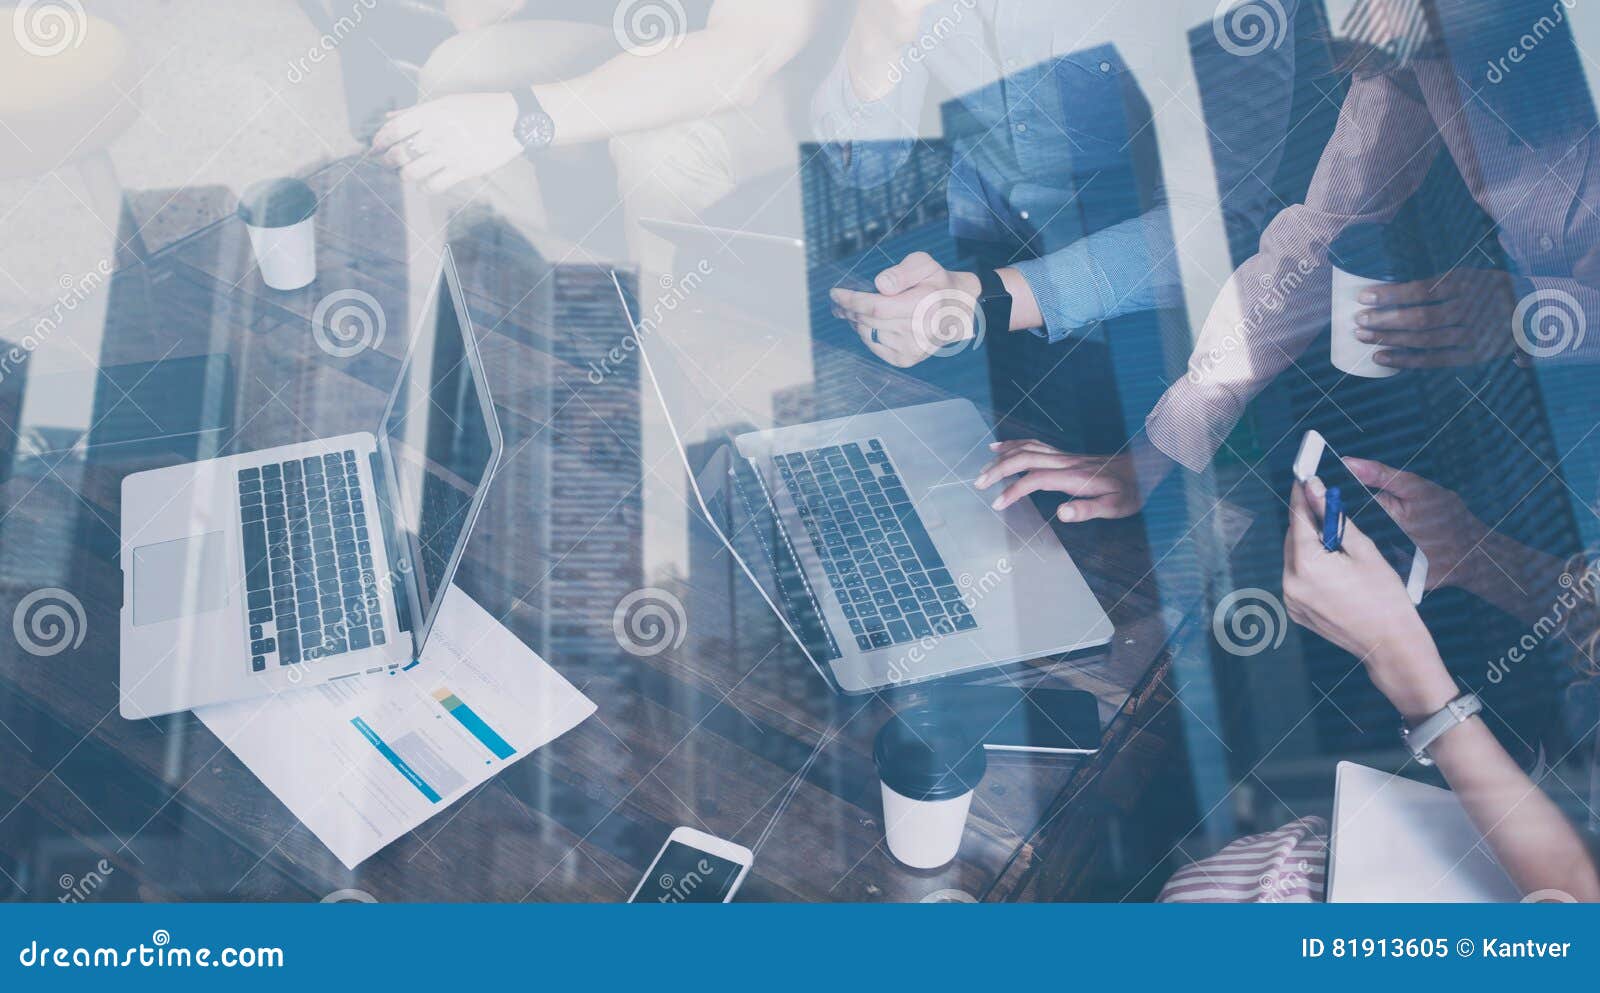 double exposure of young coworkers working together on new startup project in modern office.business people using mobile